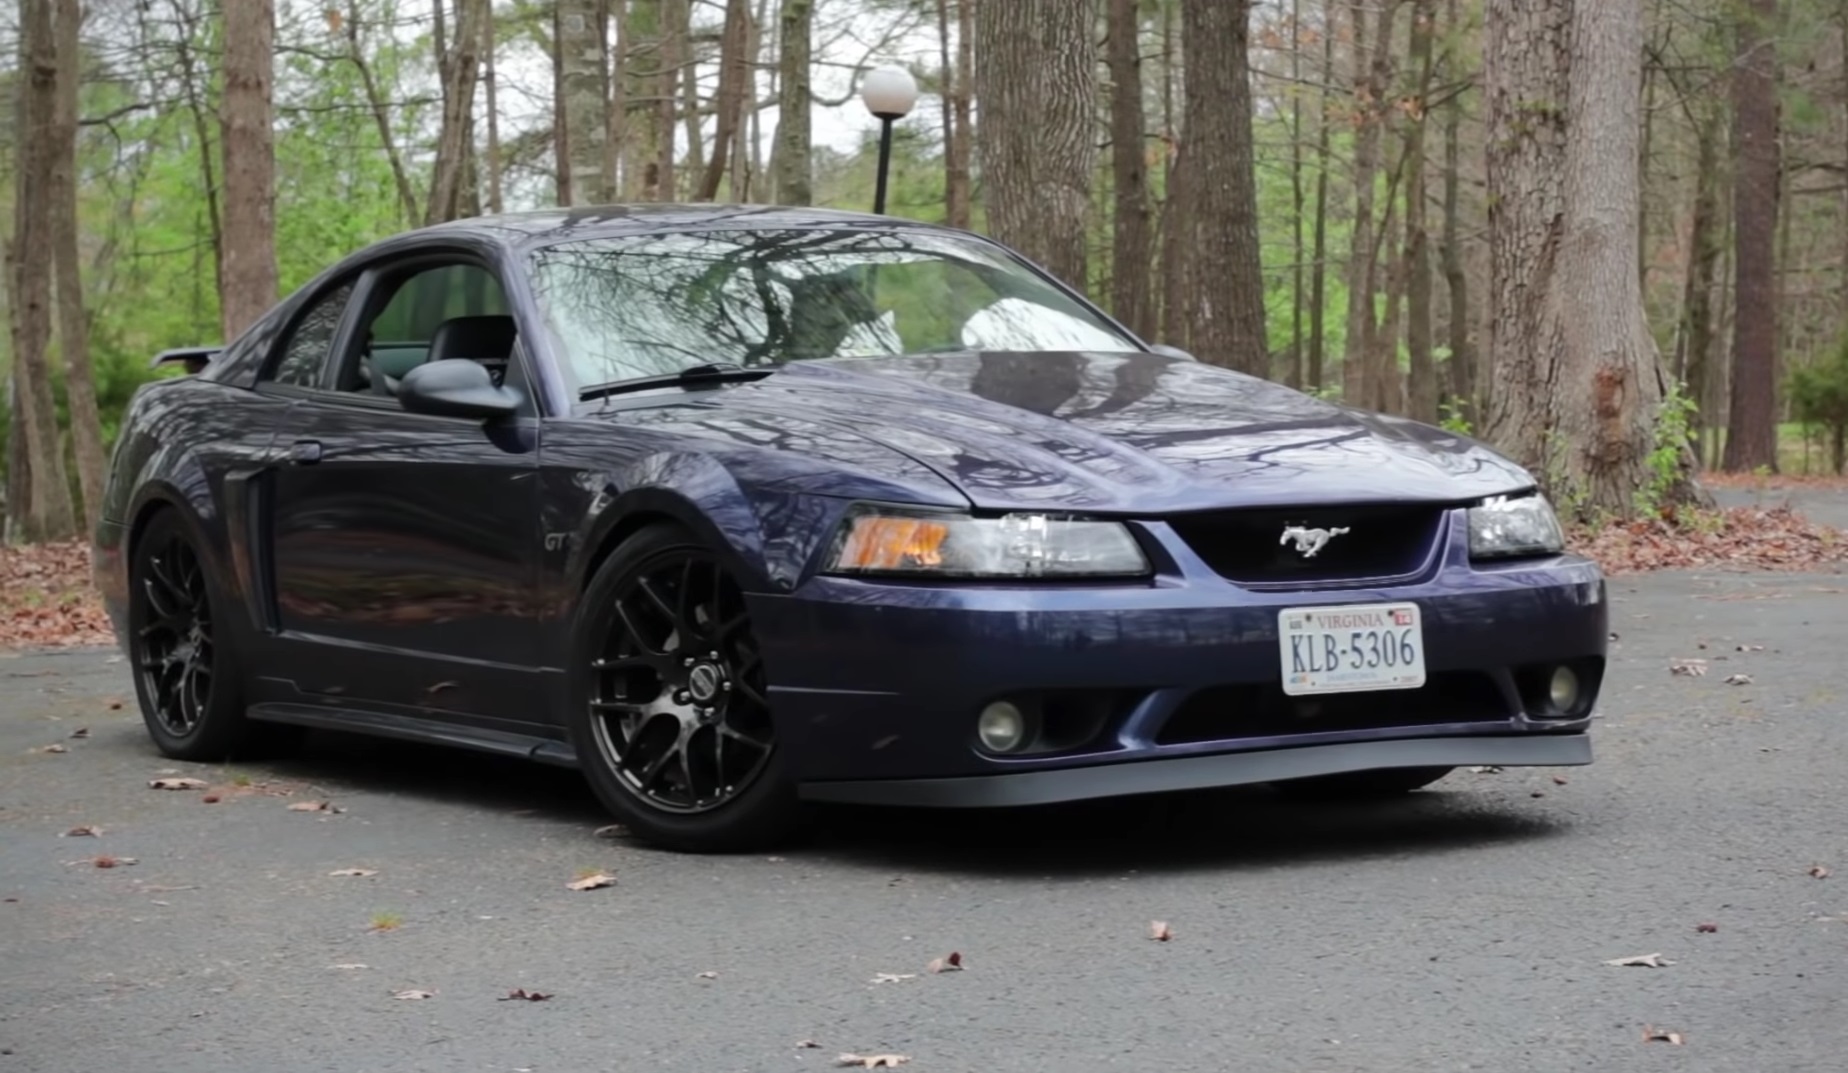 Video: Reviewing A Vortech Supercharged 2003 Ford Mustang